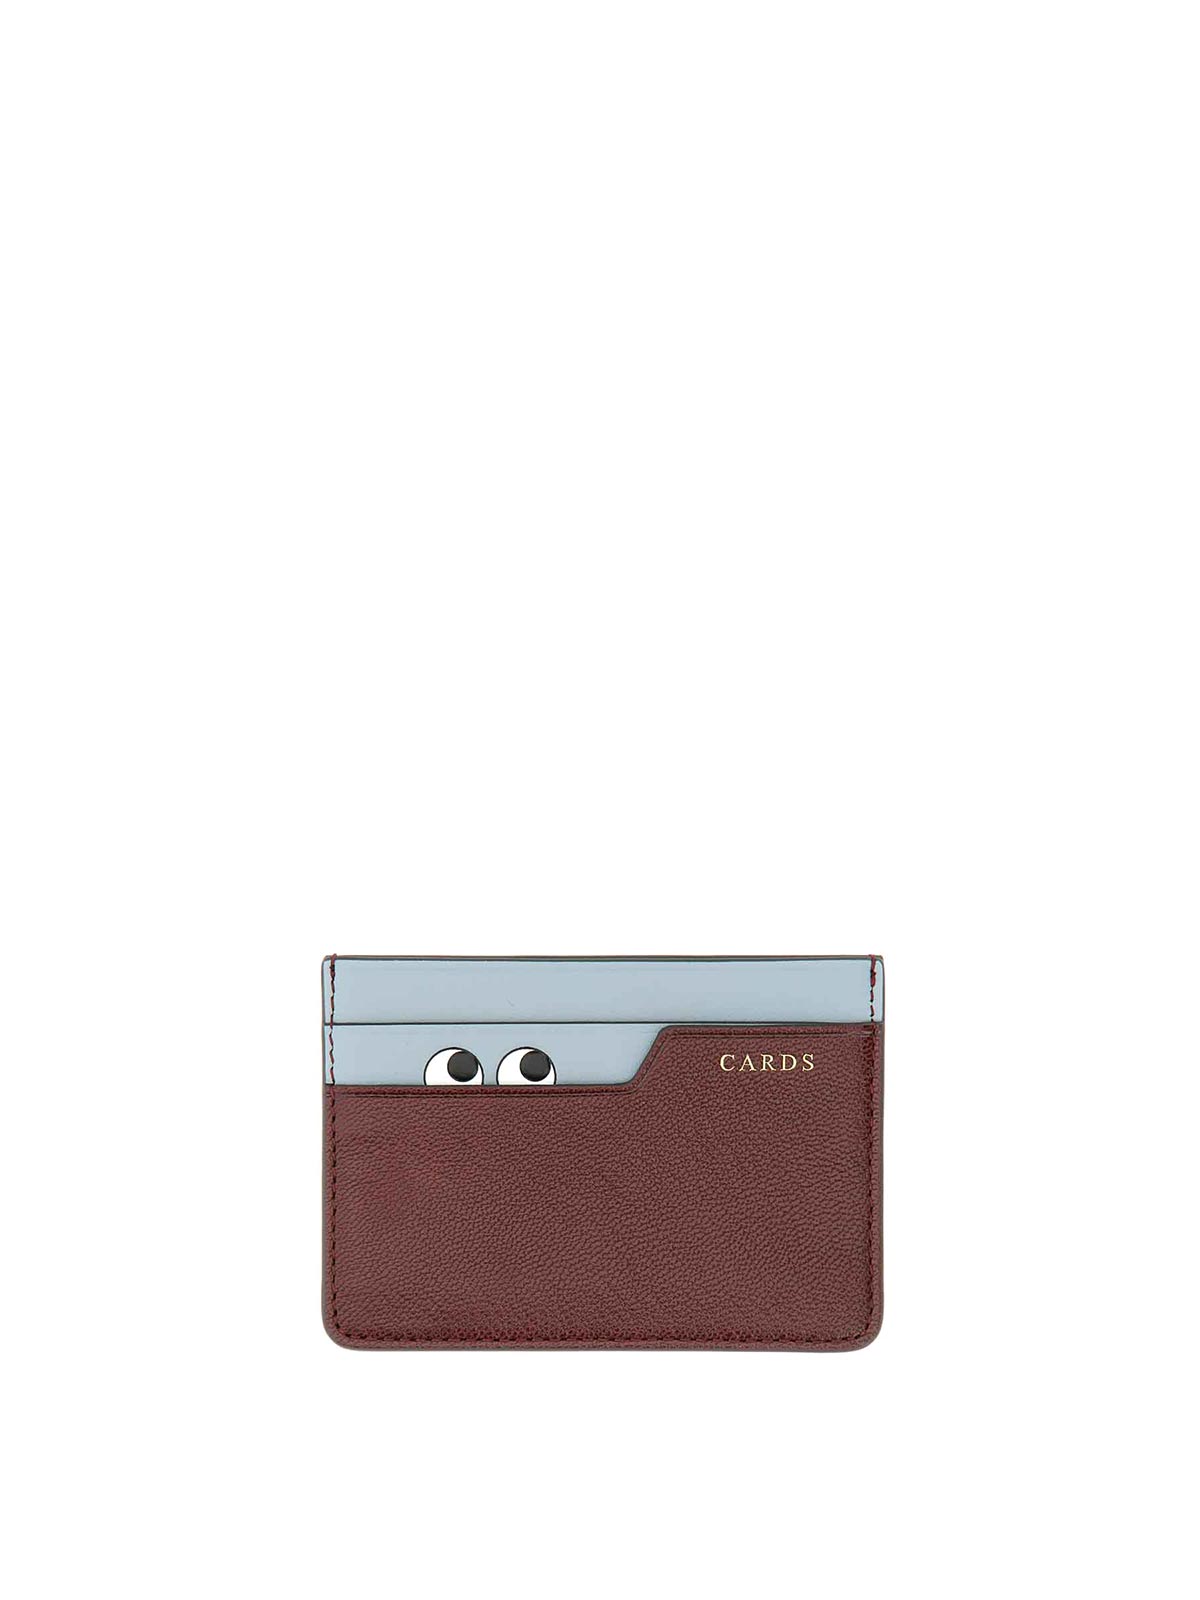 Anya Hindmarch Leather Card Holder In Dark Red